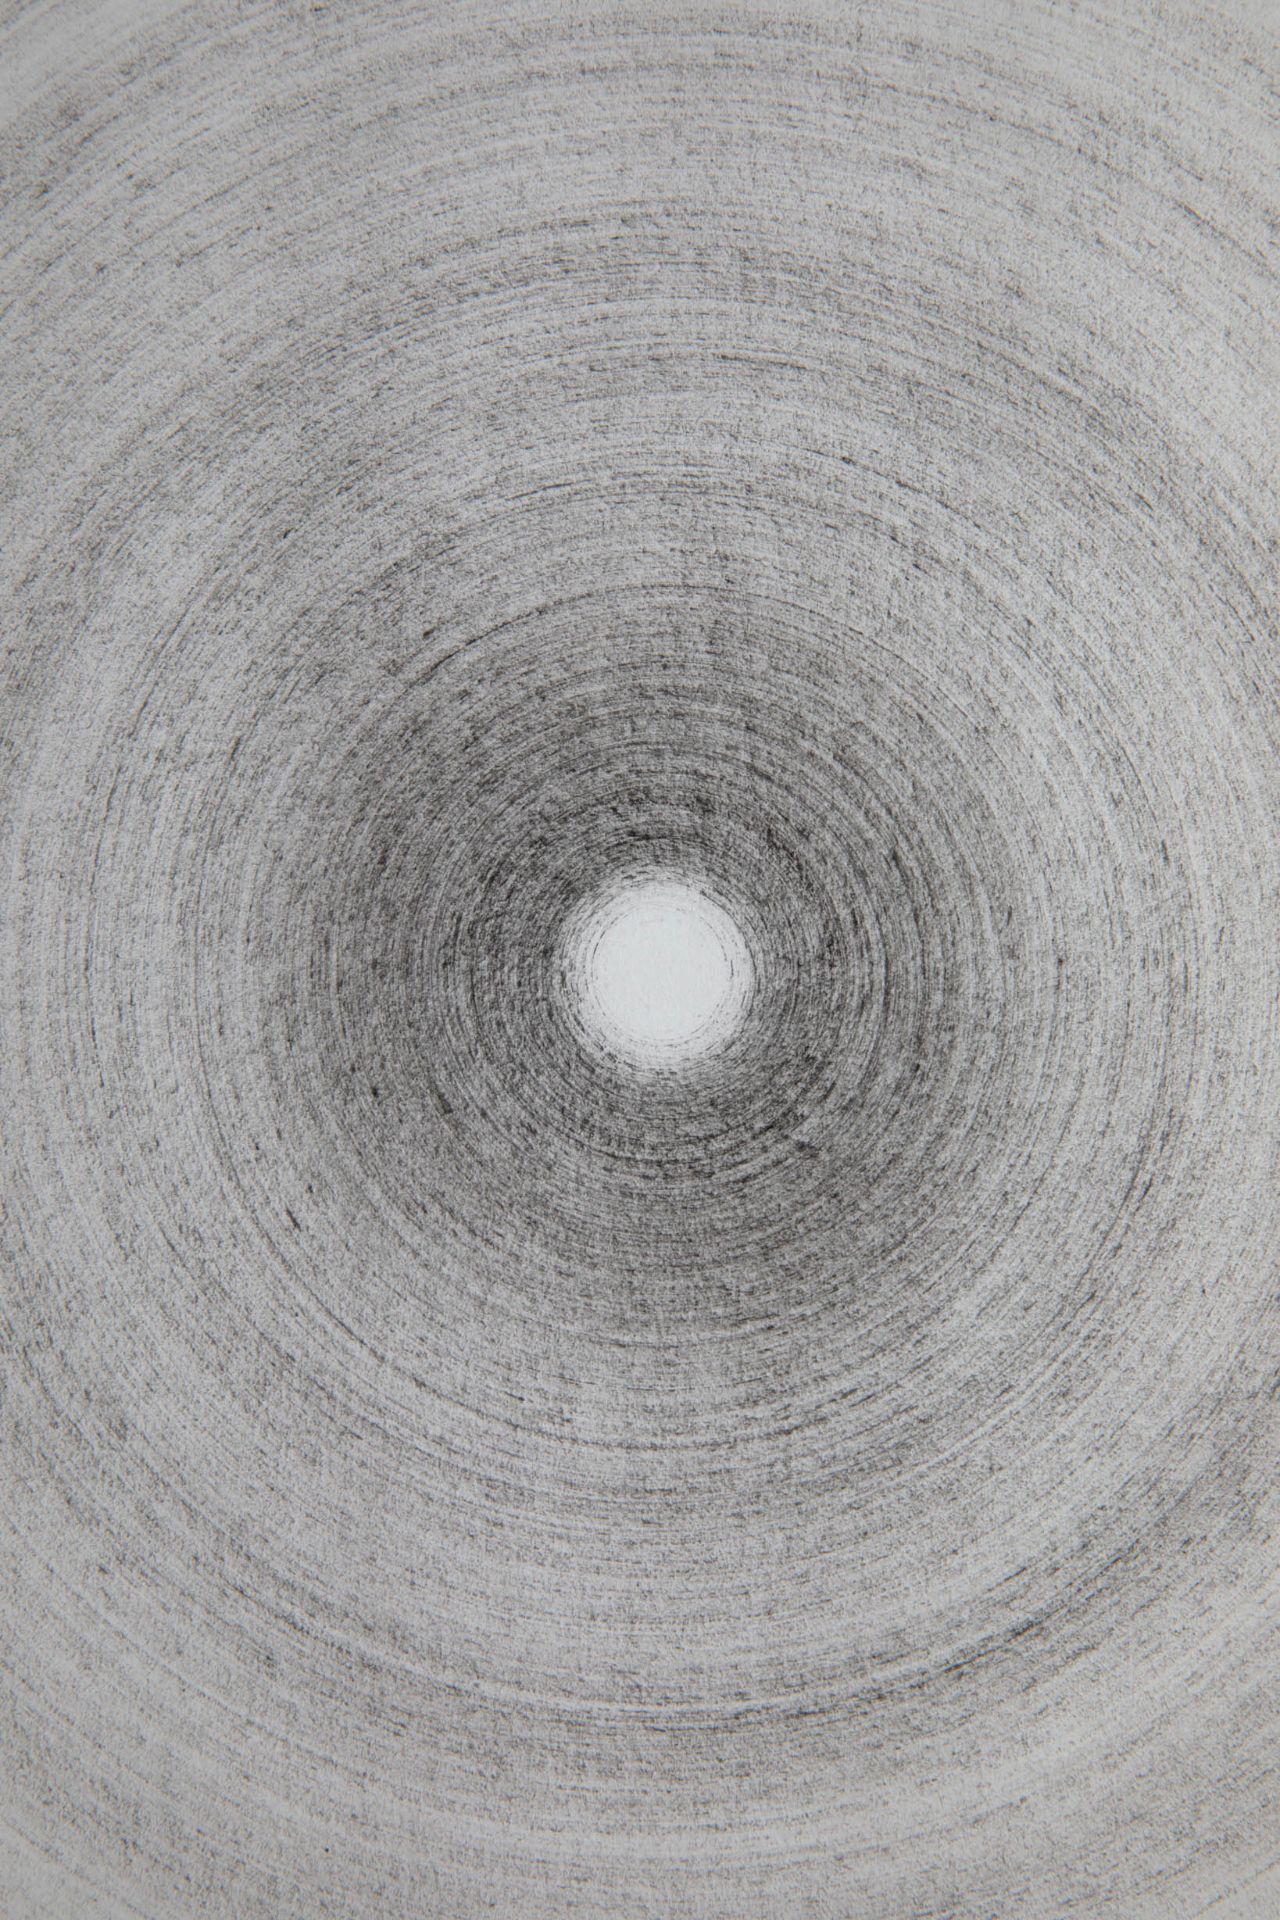 Robert Rotar, Untitled. Rotation. 1974. Pencil on paper - Image 3 of 5